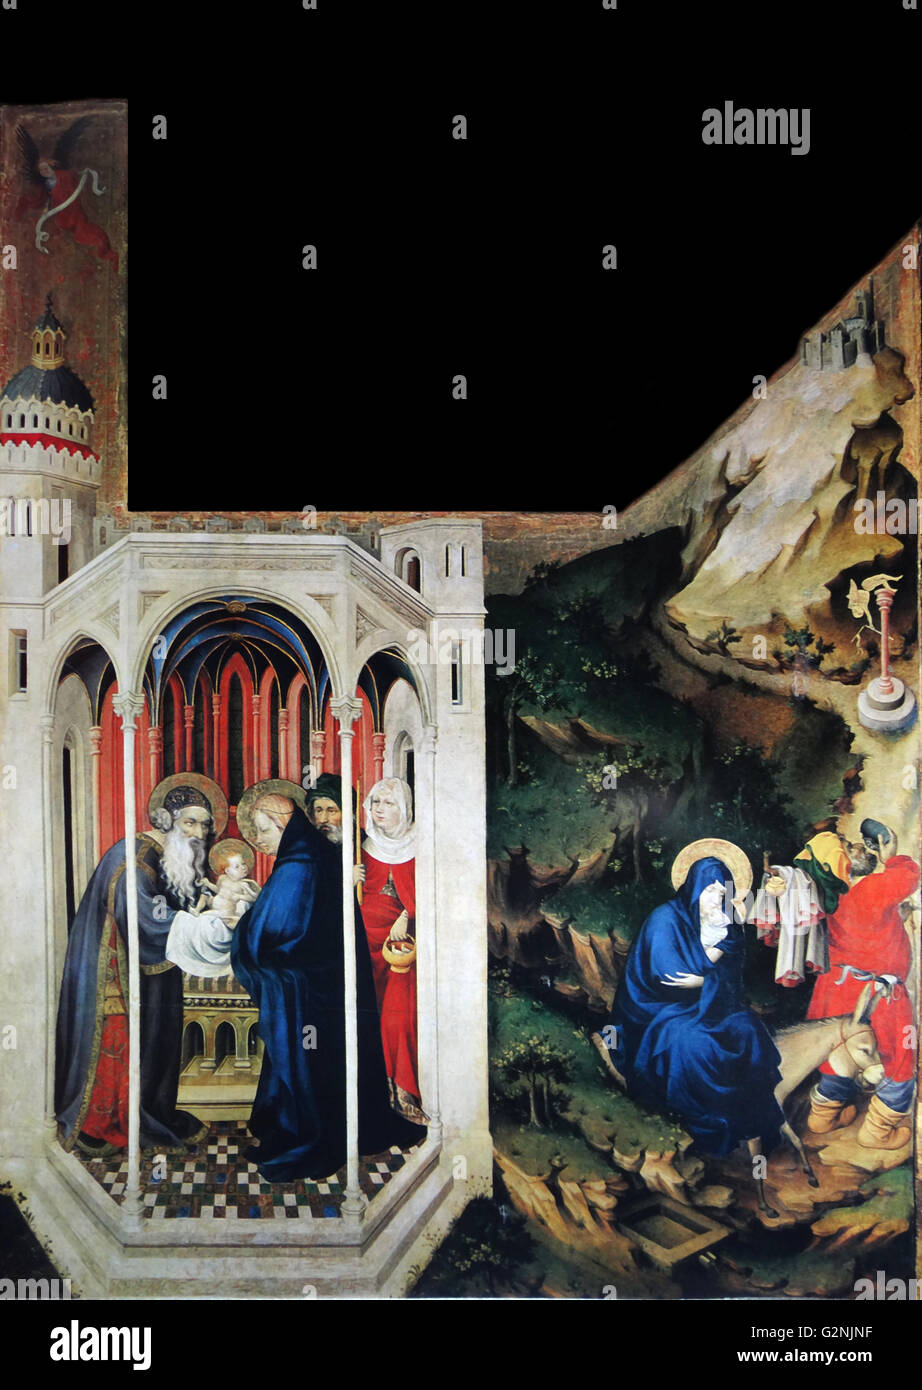 Wing of an altarpiece depicting the Annunciation, Visitation, Presentation in the temple and the Flight into Egypt. Painted by Melchior Broederlam. Dated 14th Century Stock Photo